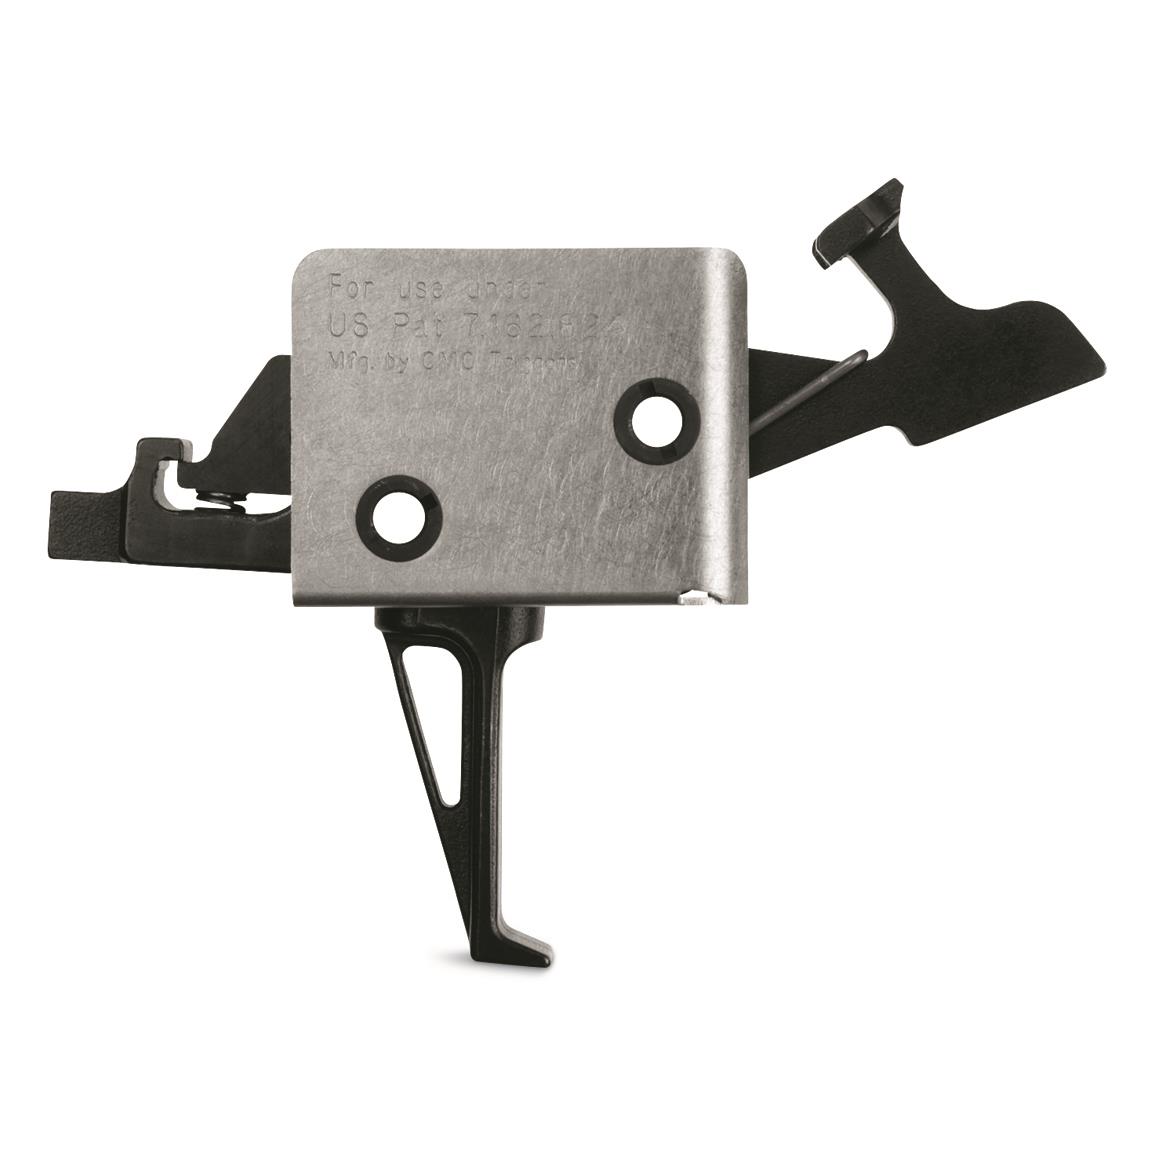 CMC Triggers AR-15 Drop-In Flat Trigger, 2-Stage Match, .154" Small Pin